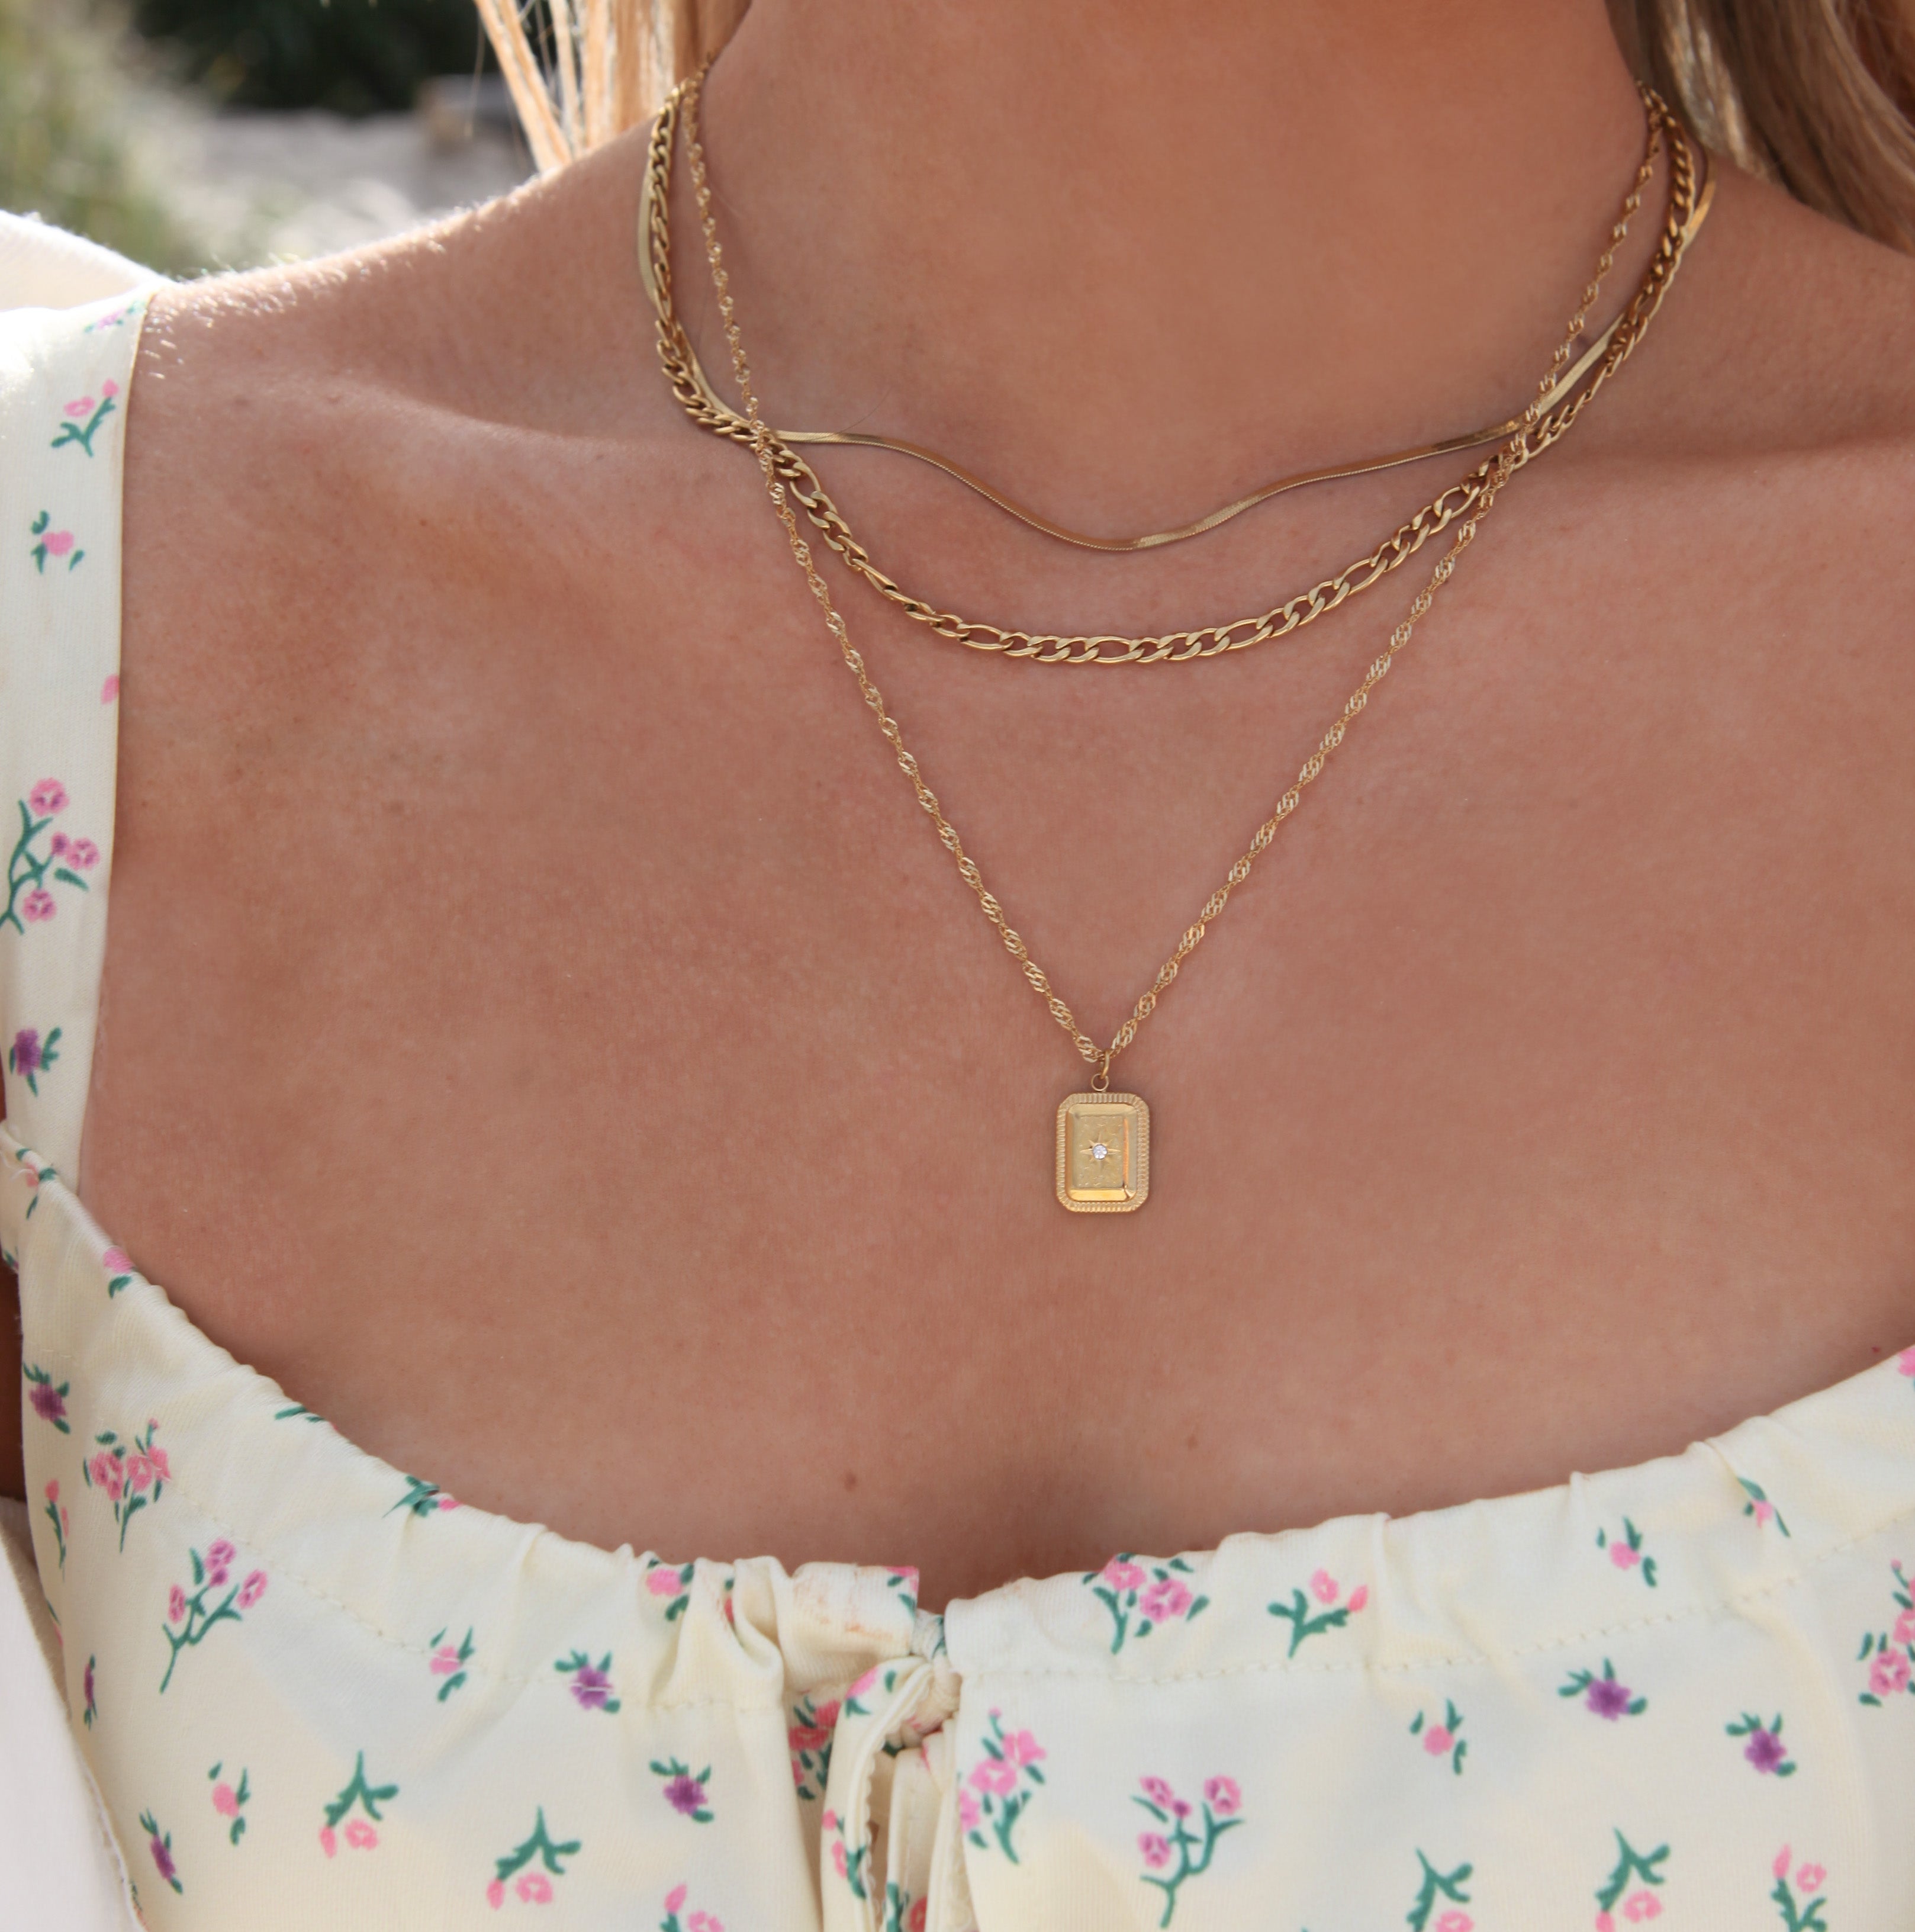 Taylor - 18k Gold Curl Chain Necklace